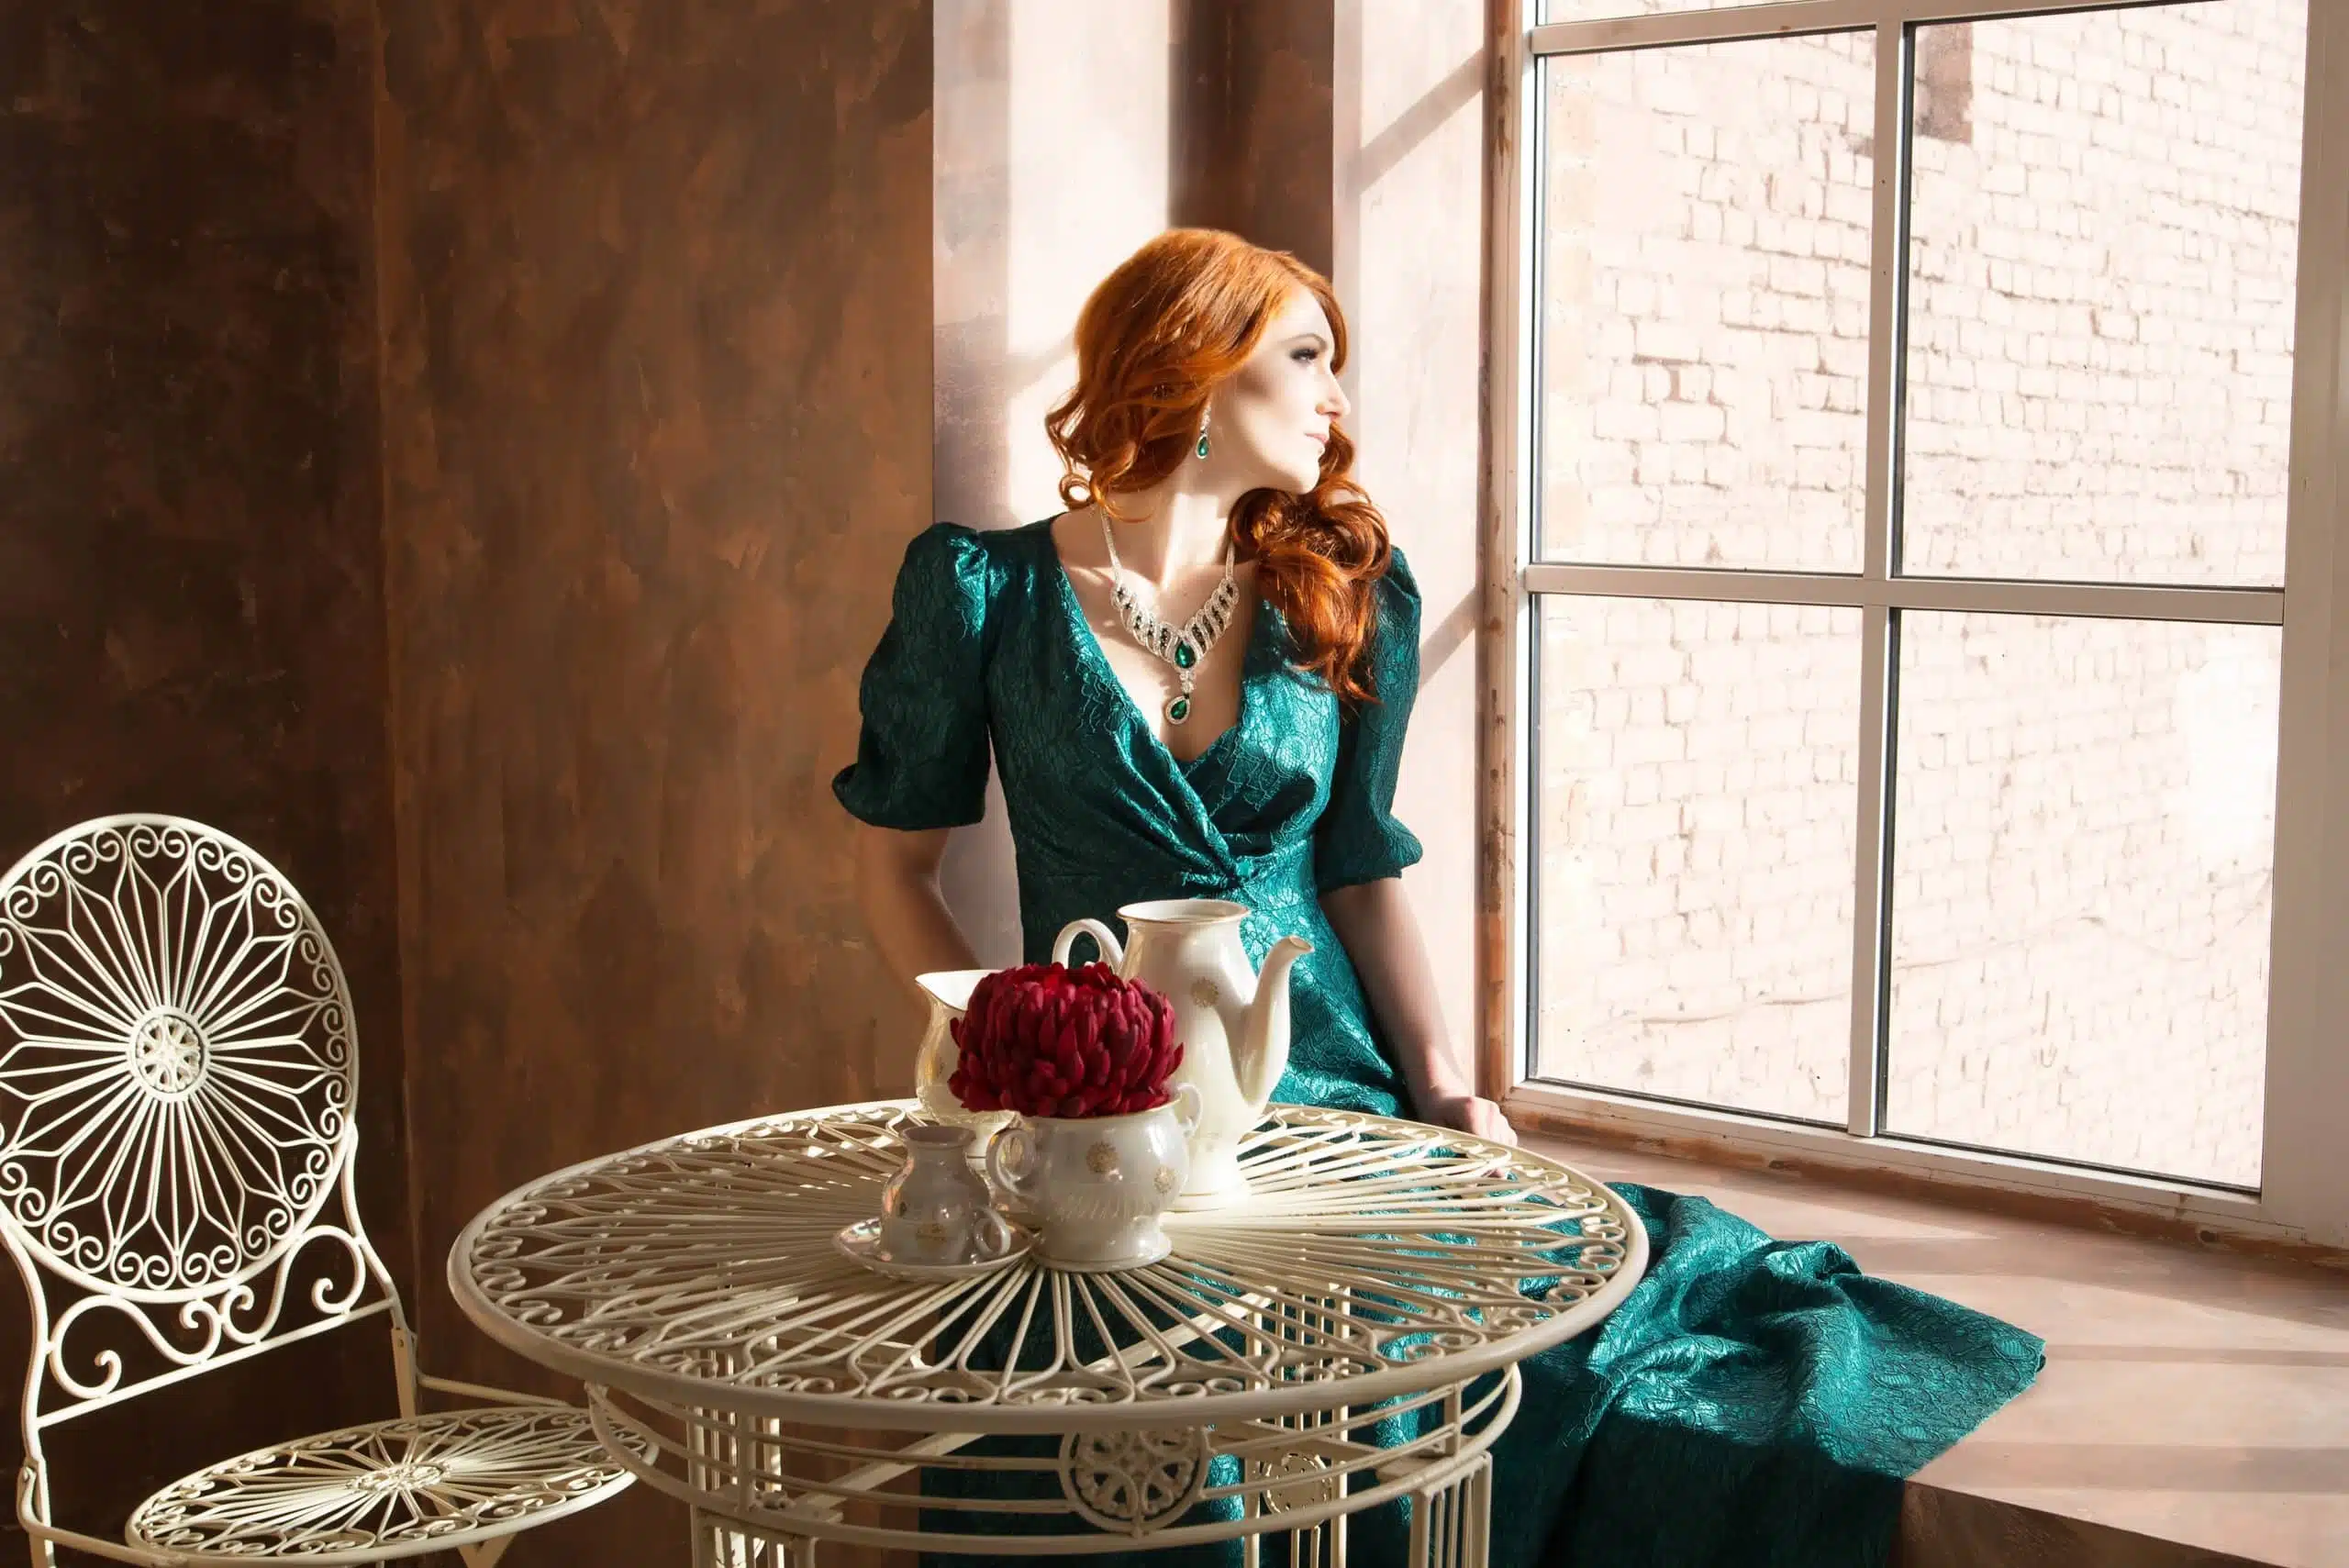 Vintage woman, redhead sitting and looking outside the window.